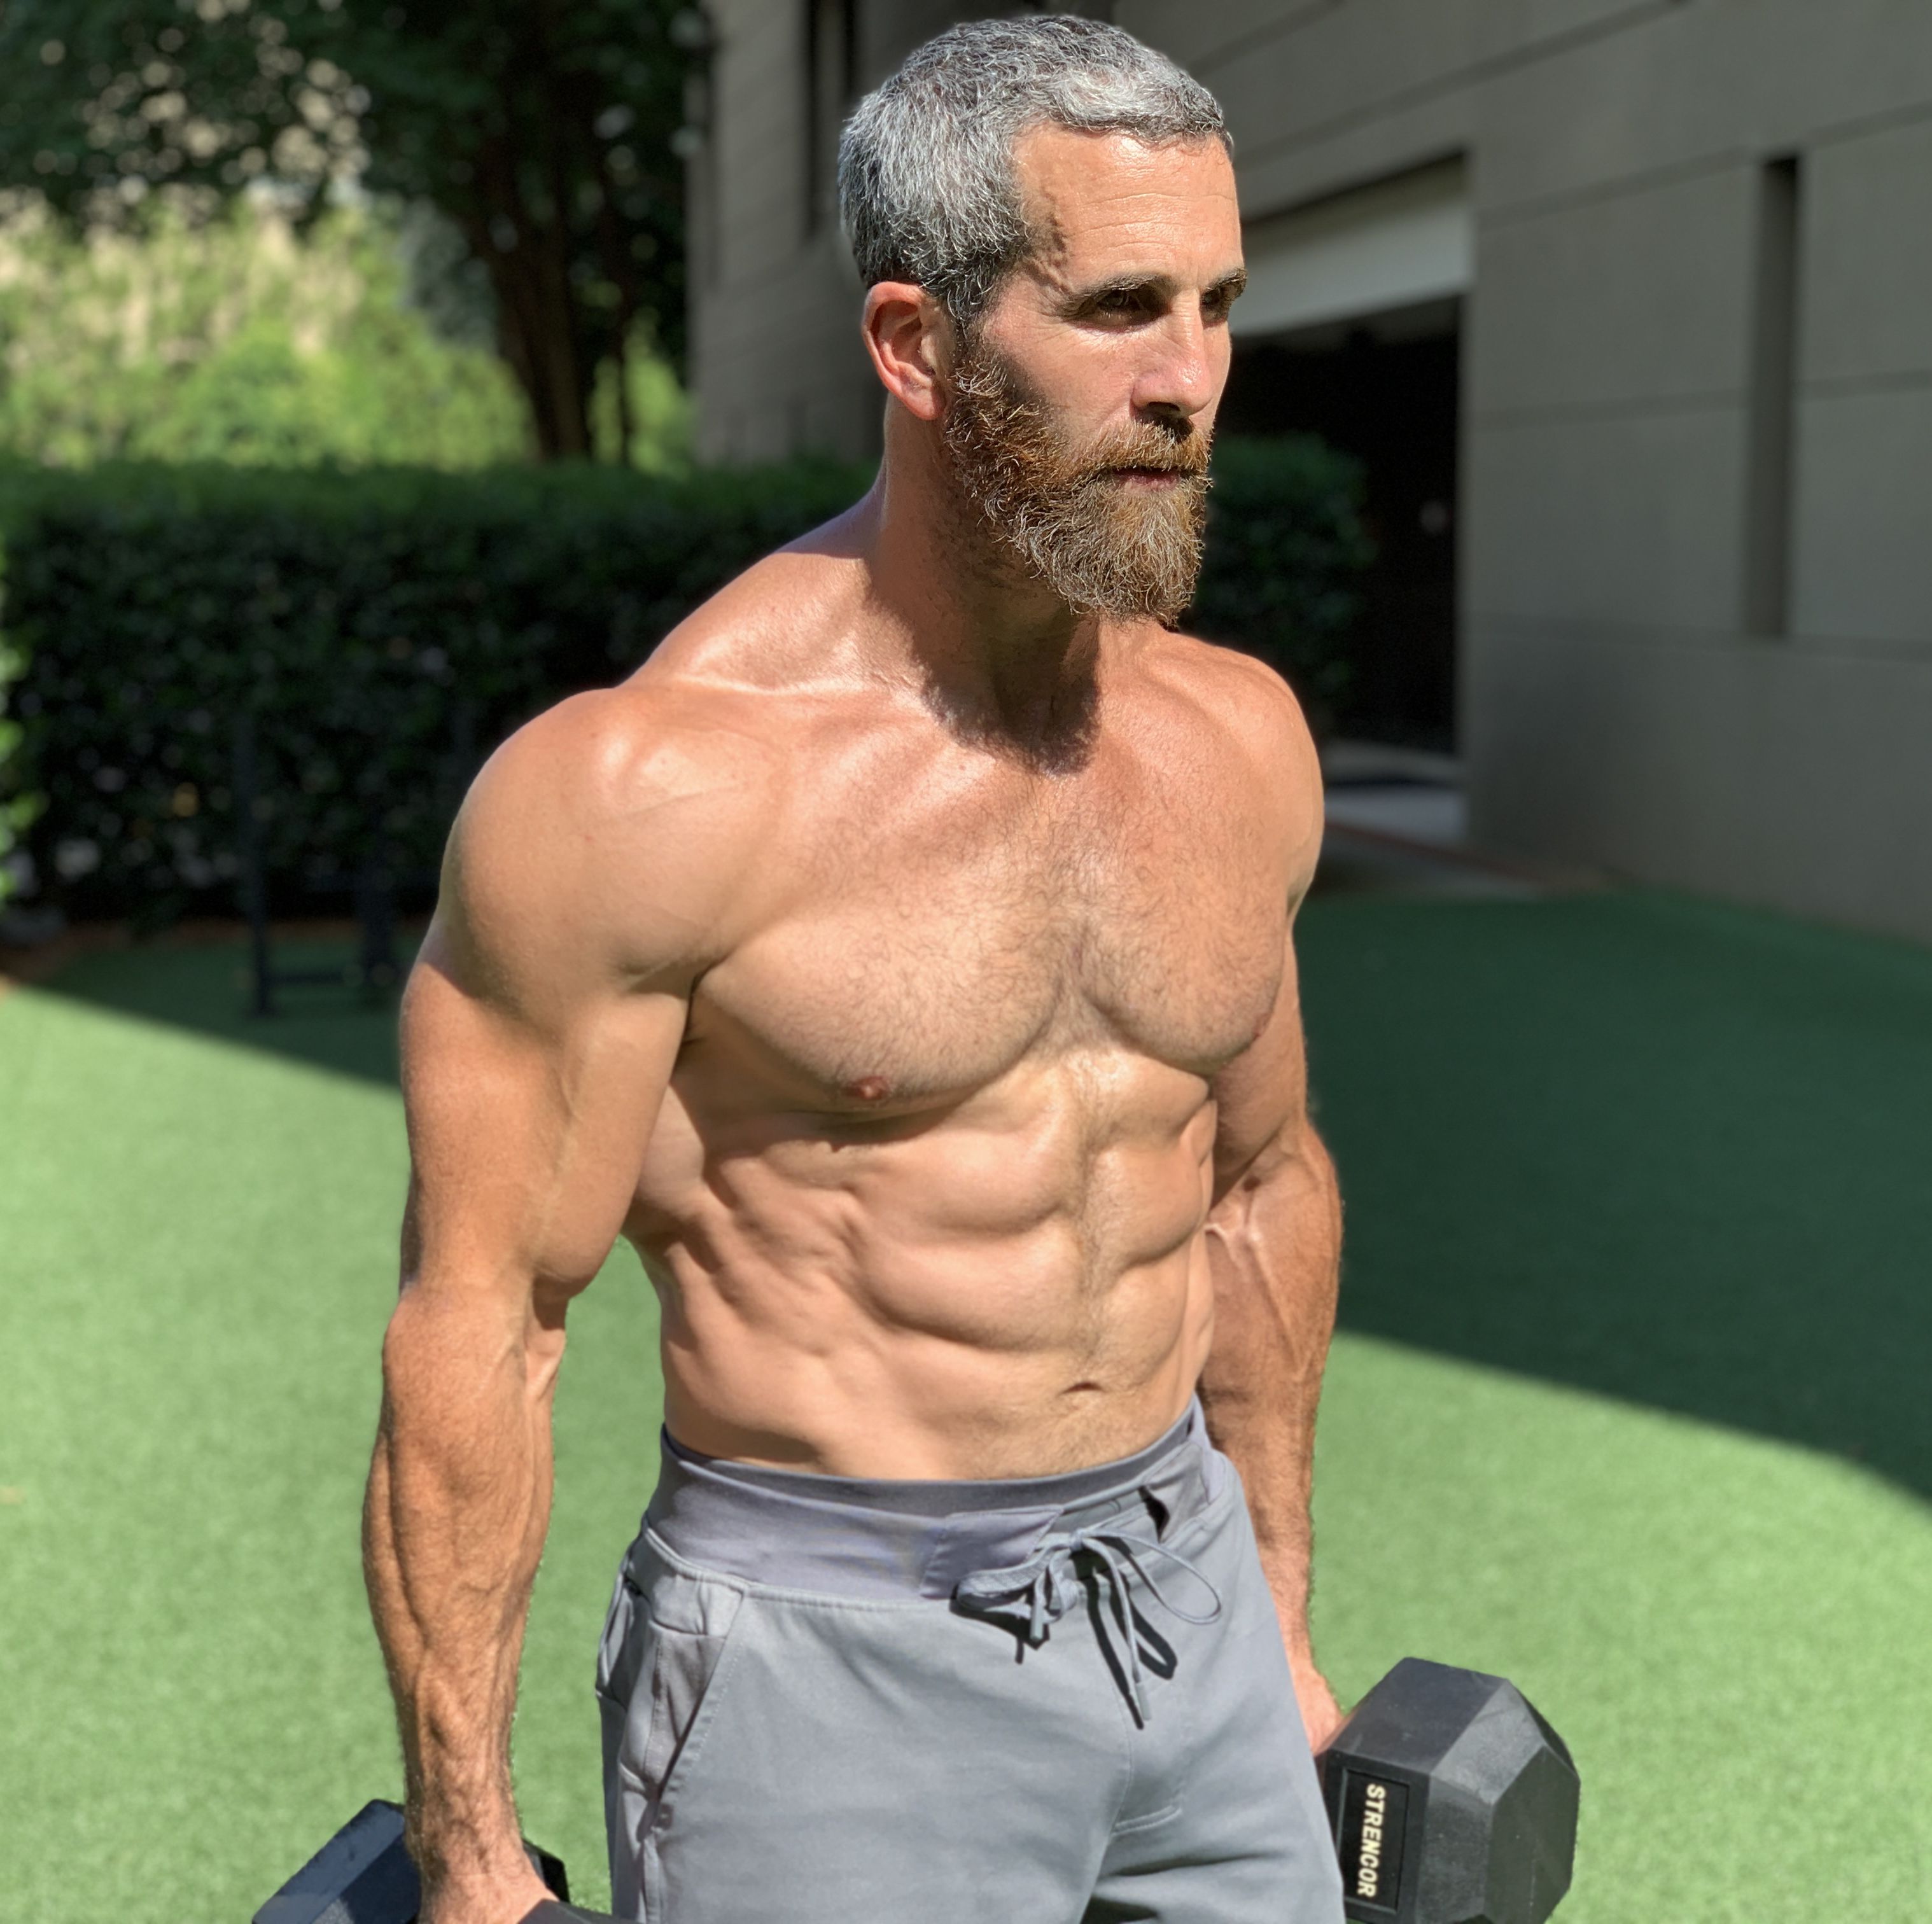 Trainer Paul Sklar Shares His Best Advice for Getting (and Staying) Ripped Into Your 50s